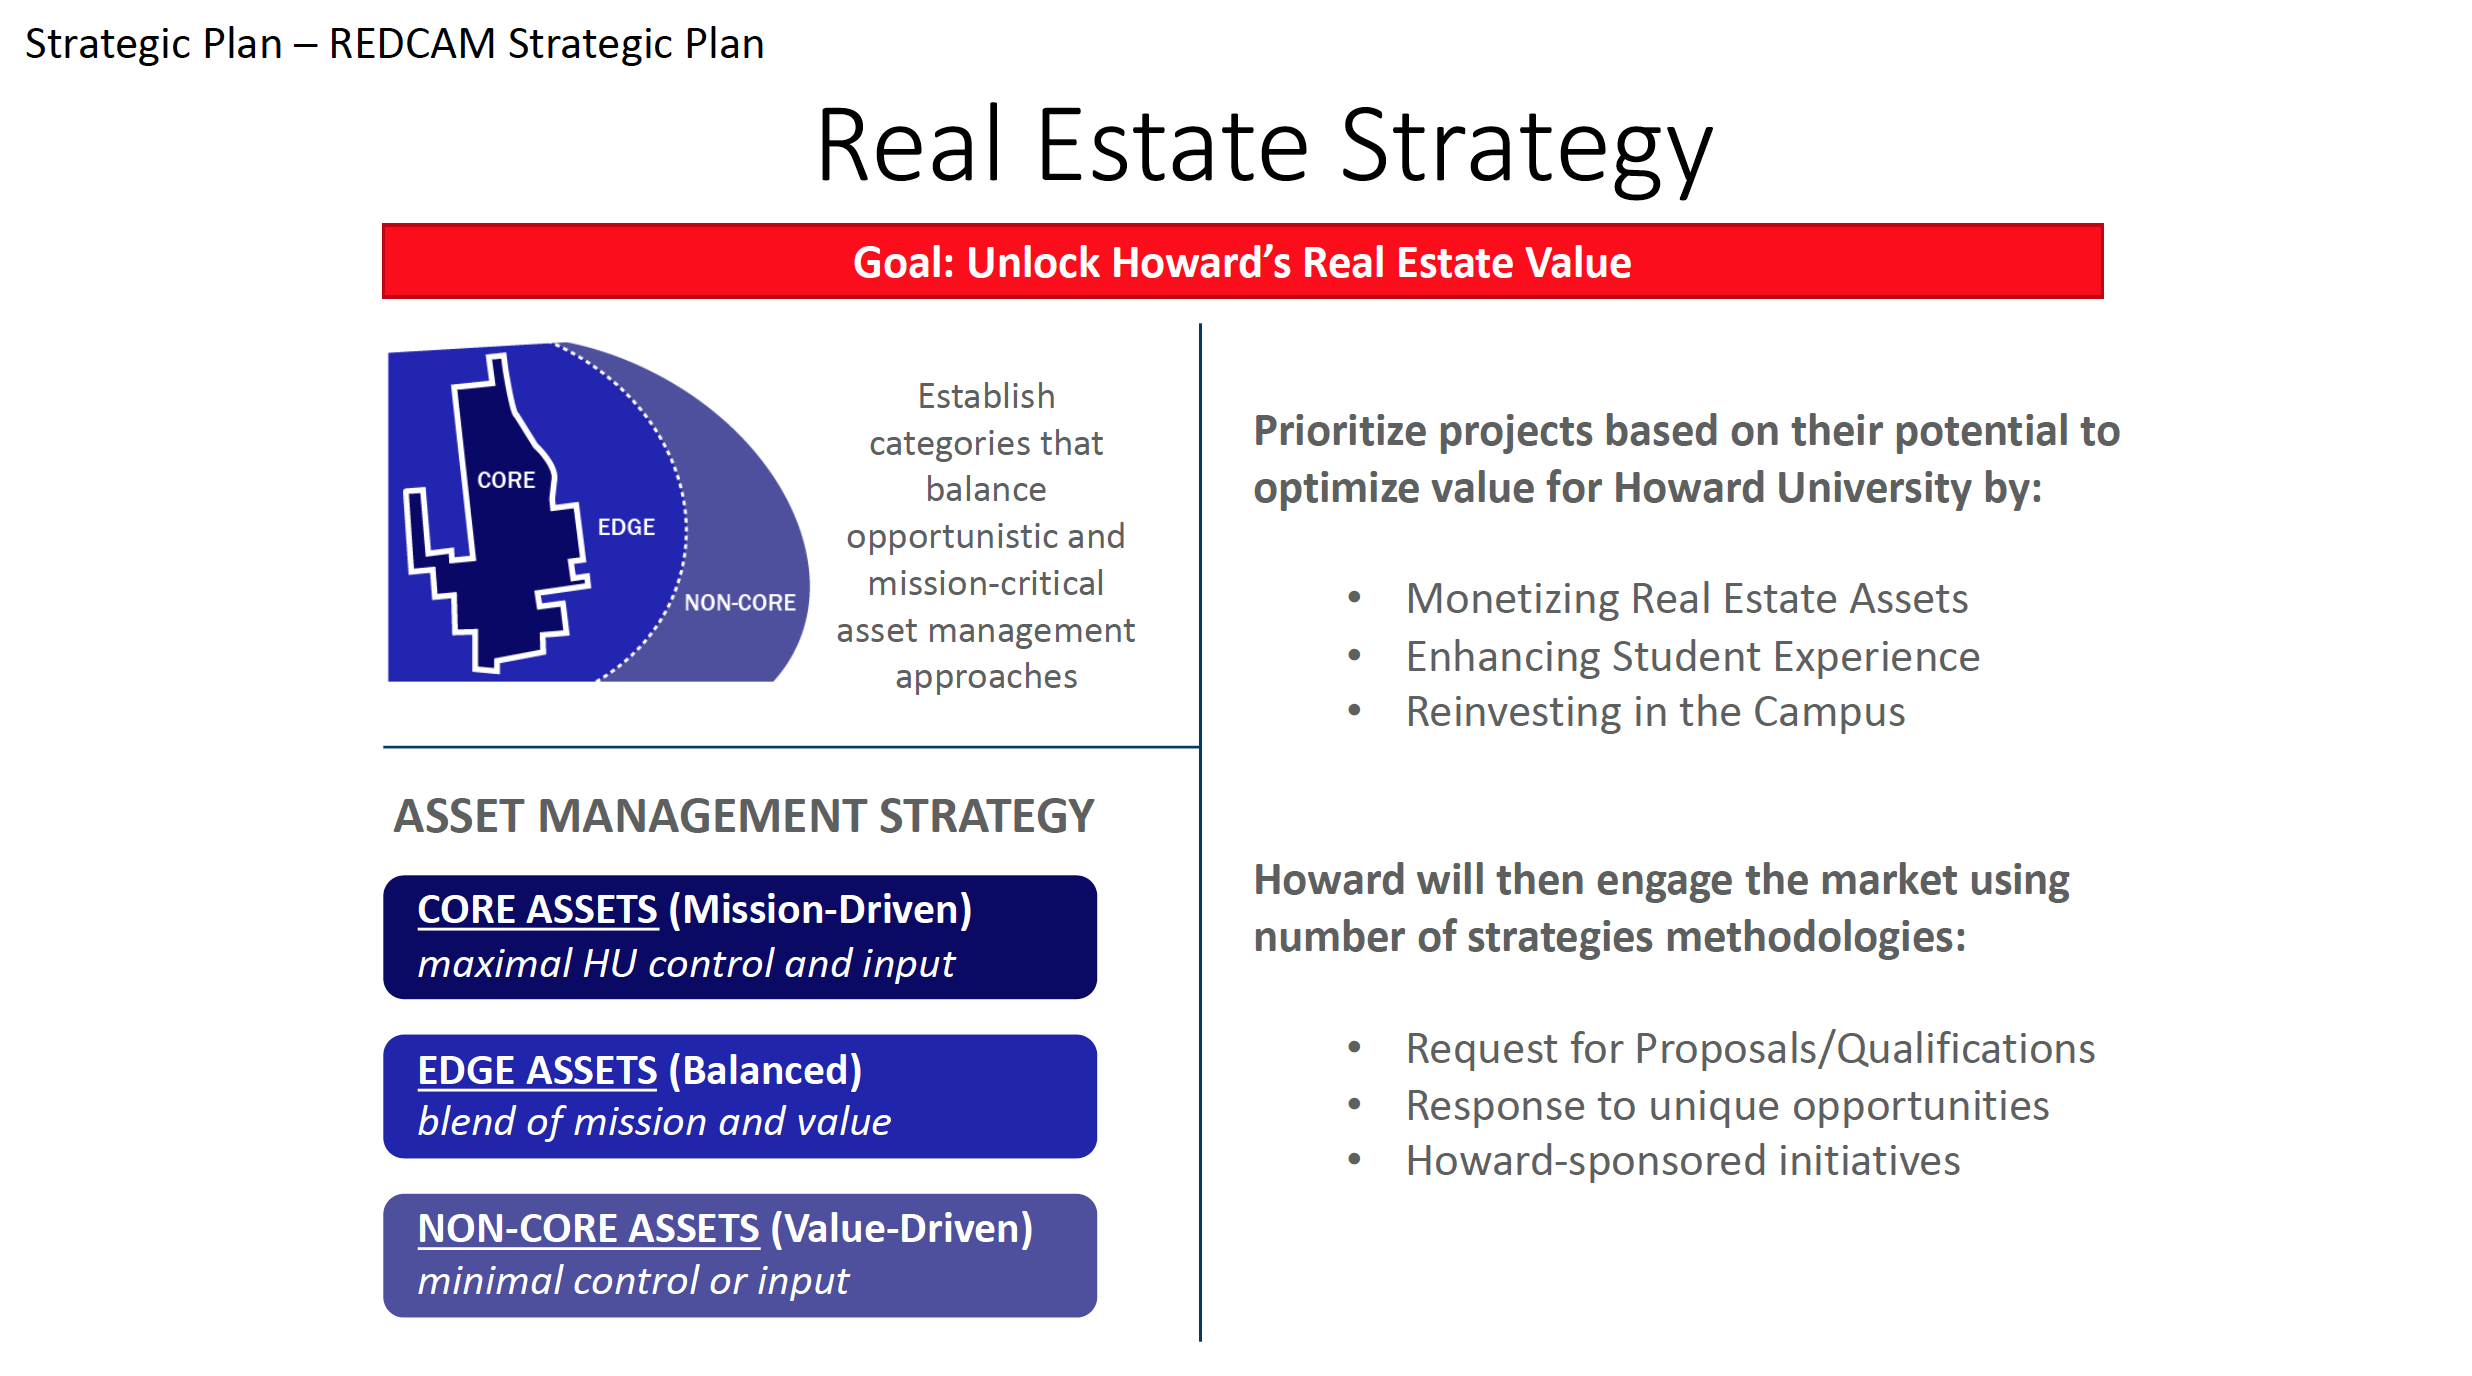 Image of Howard University's Real Estate Strategy plan